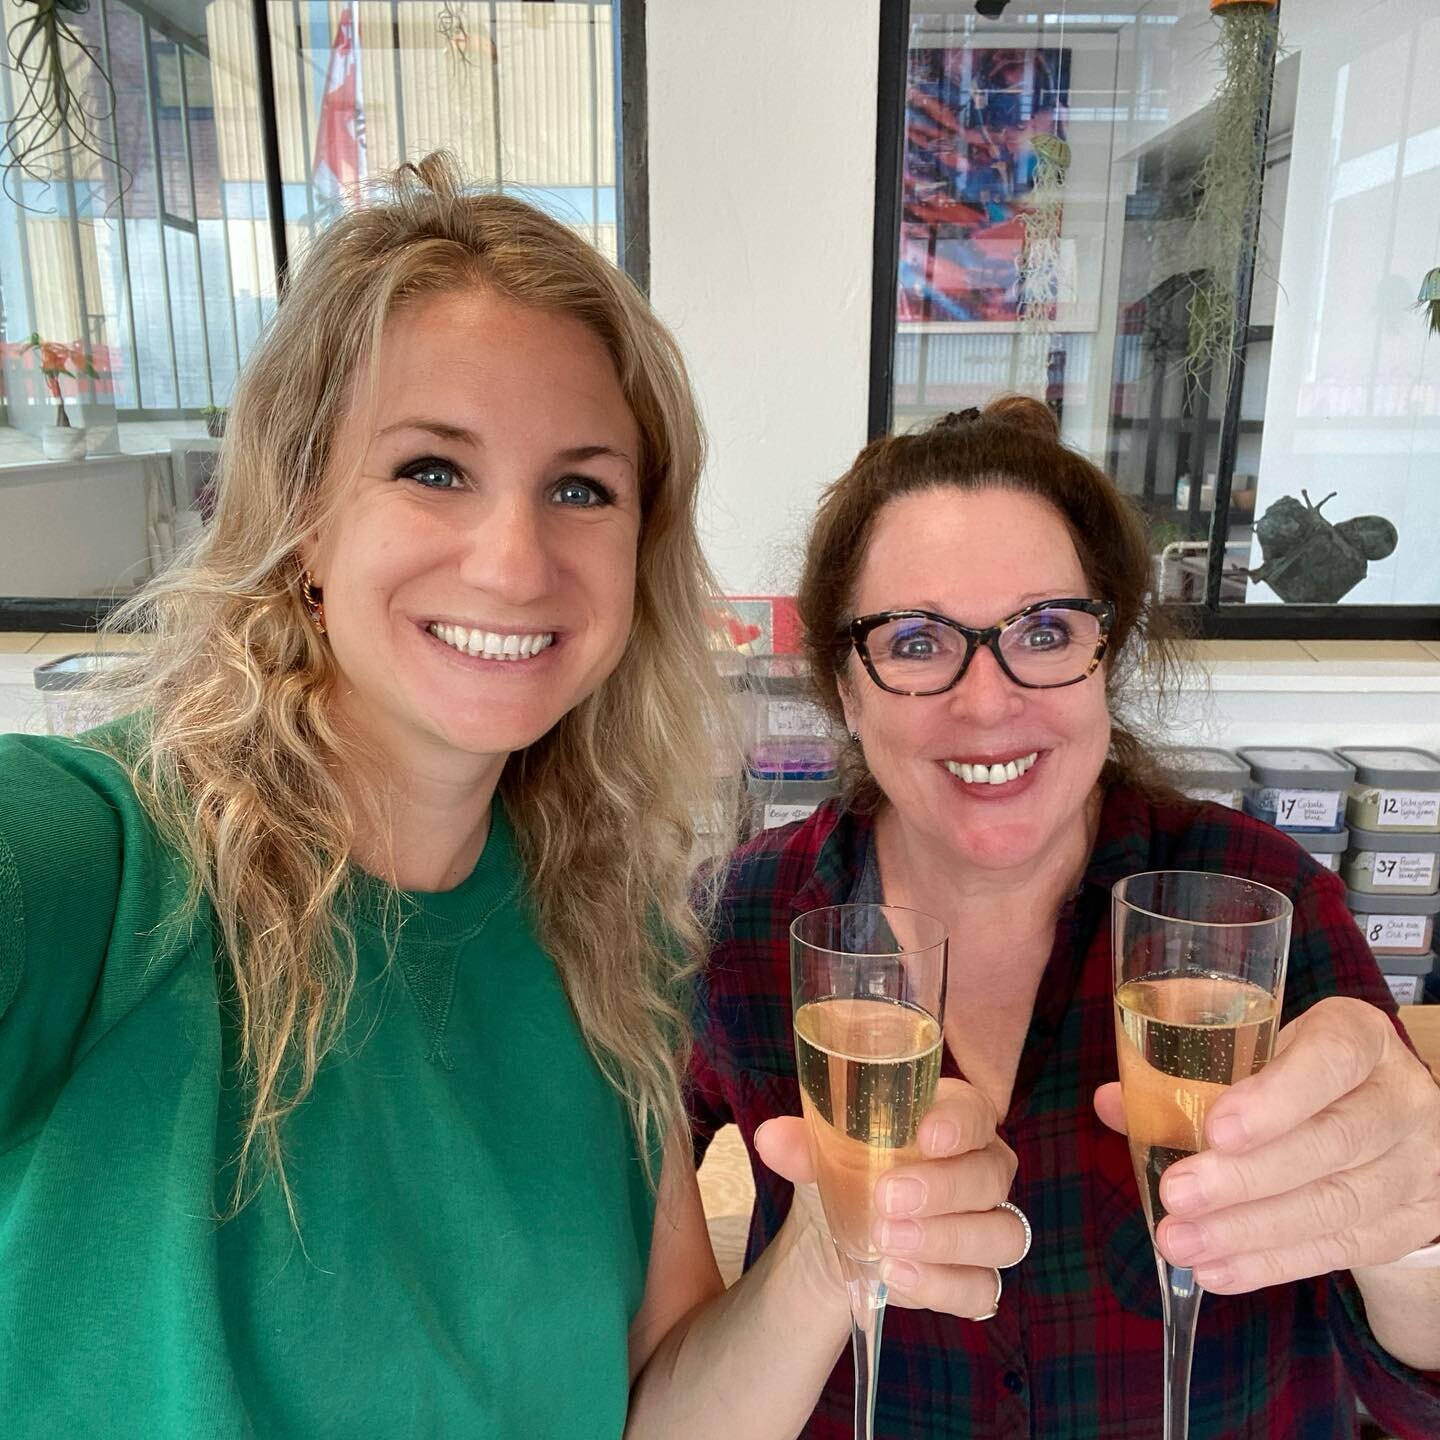 Cheers to a successful first trail week 🍾🤩 Can&rsquo;t wait to continue this new journey 🥰.
.
.
#champagne #cheers #success #newstudio #studio #studiolife #ceramics #keramiek #keramiekatelier #cursussen #hobby #atelier #ceramic #clay #pottery #pot